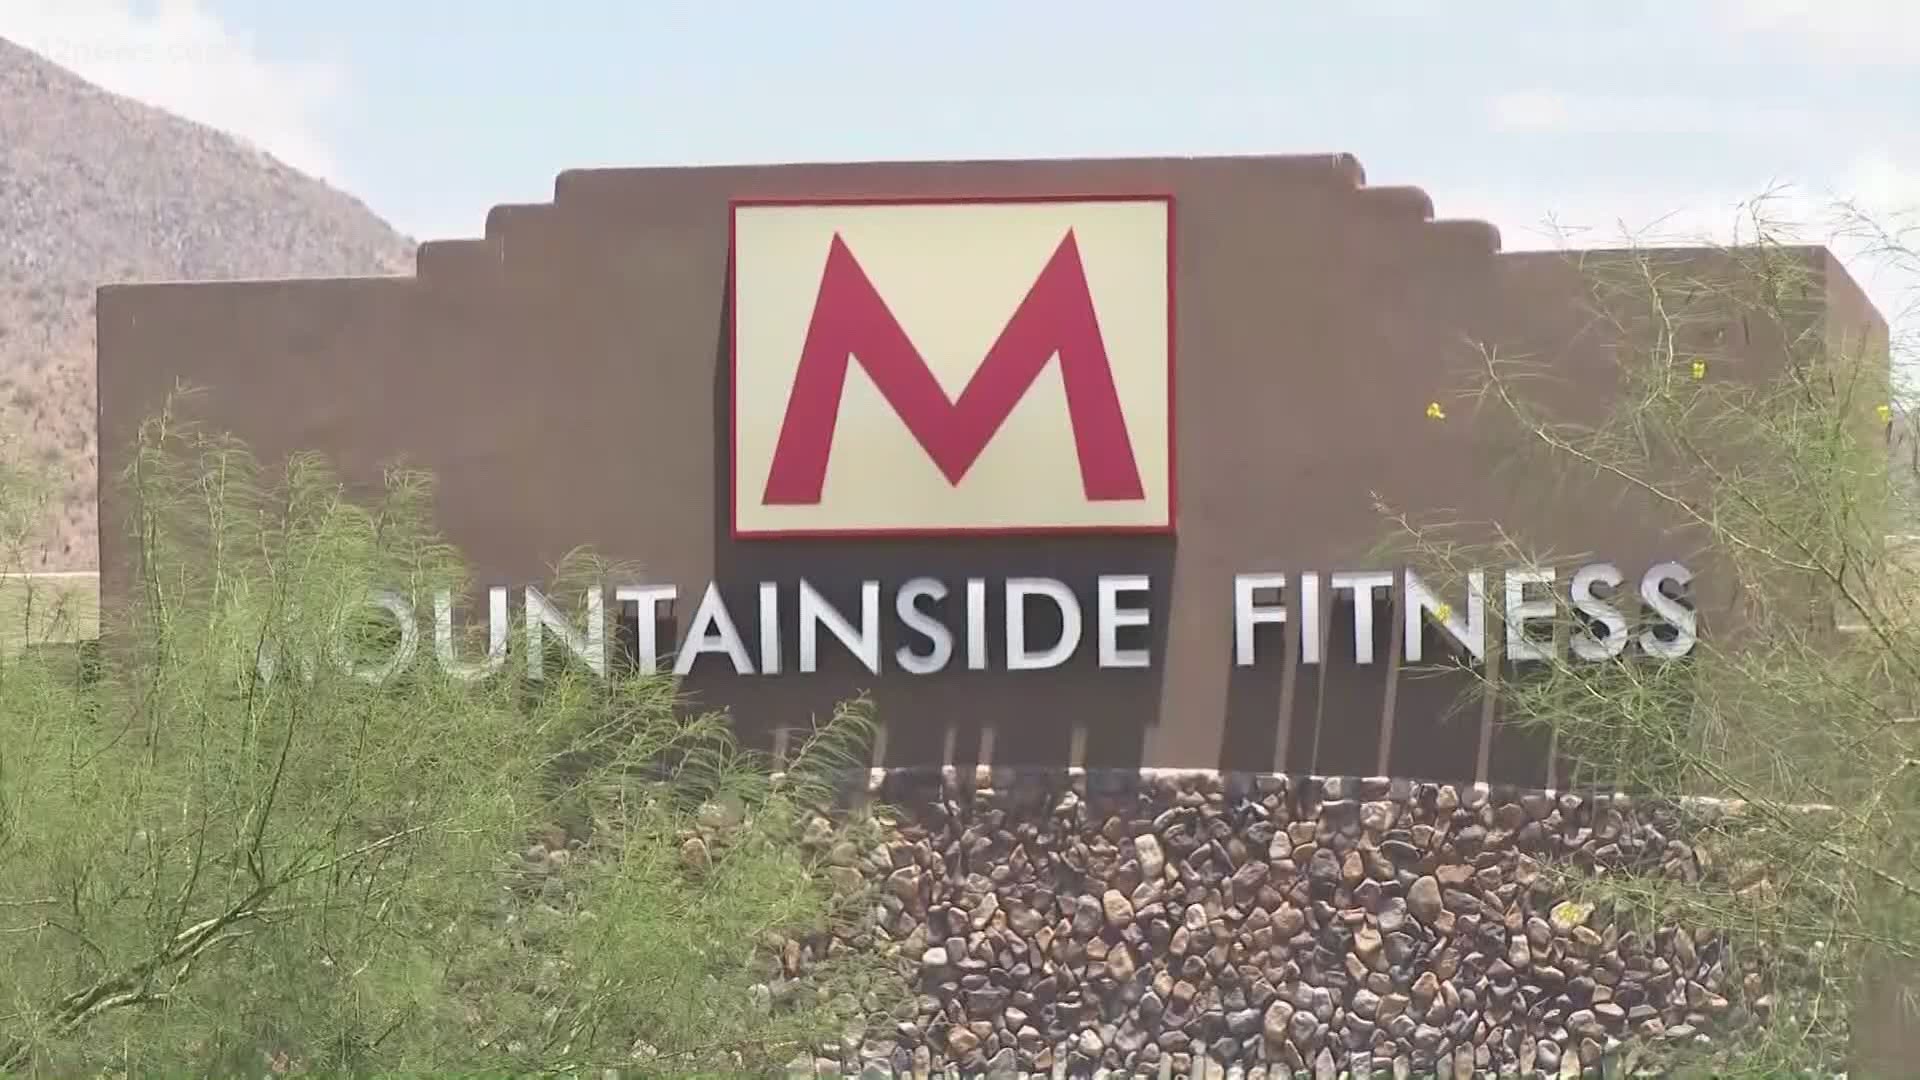 Gov. Ducey is the winner of a legal battle with the owner of Mountainside Fitness. A judge ruled that all gyms defying the governor's orders to close must comply.